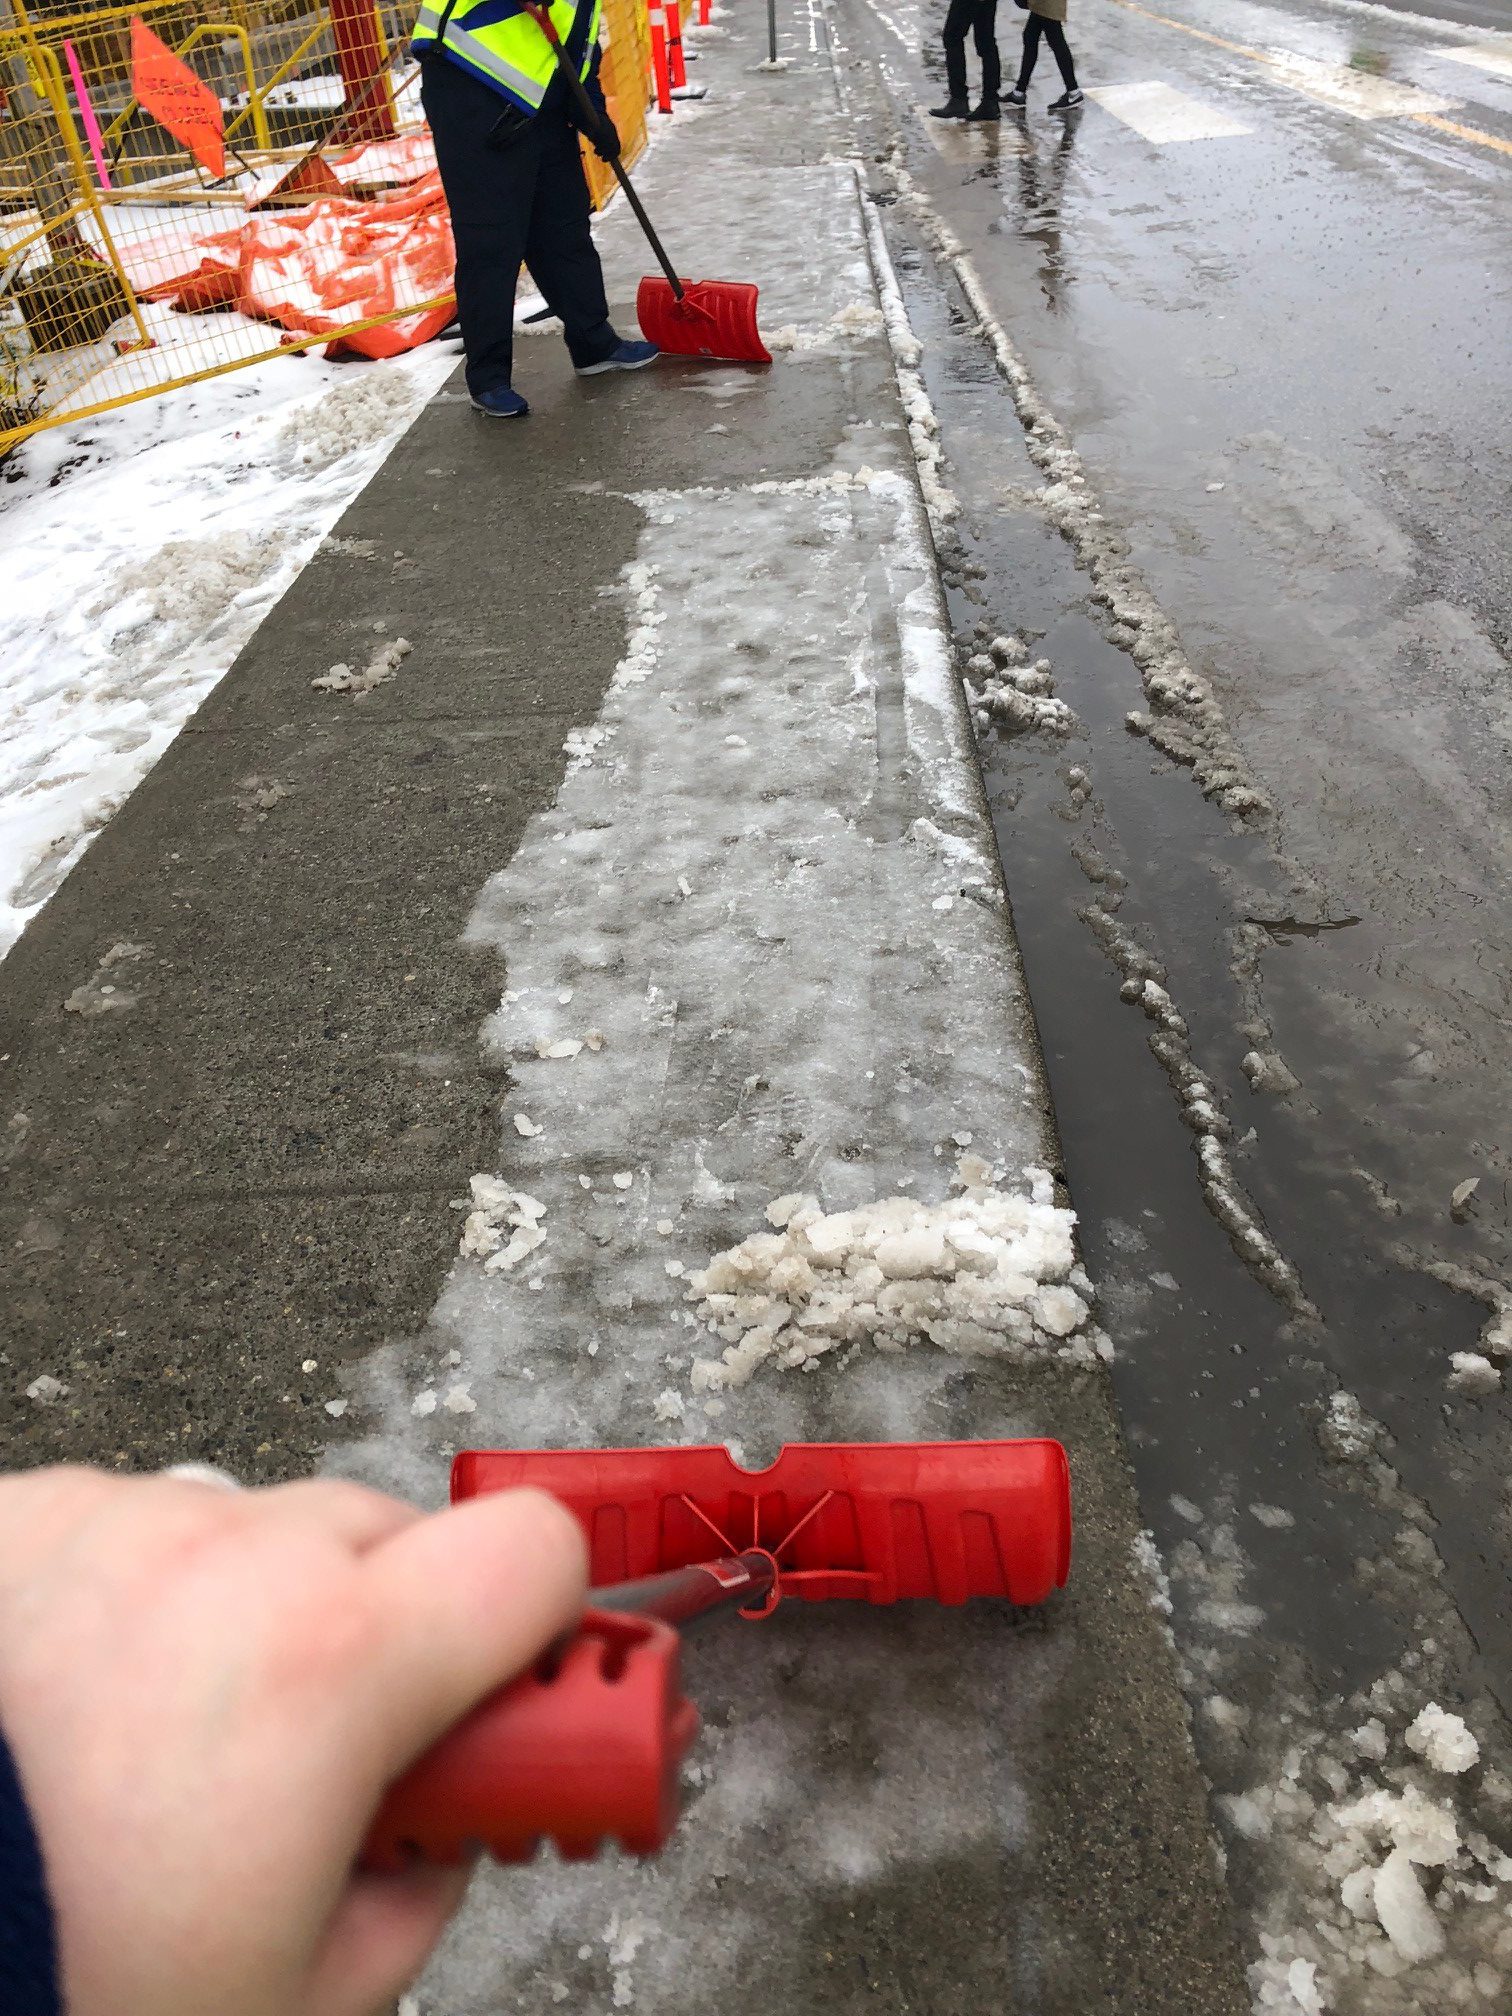 SkyTrain Attendants shovelling snow and ice on the sidewalk near 22nd Street Station in 2019